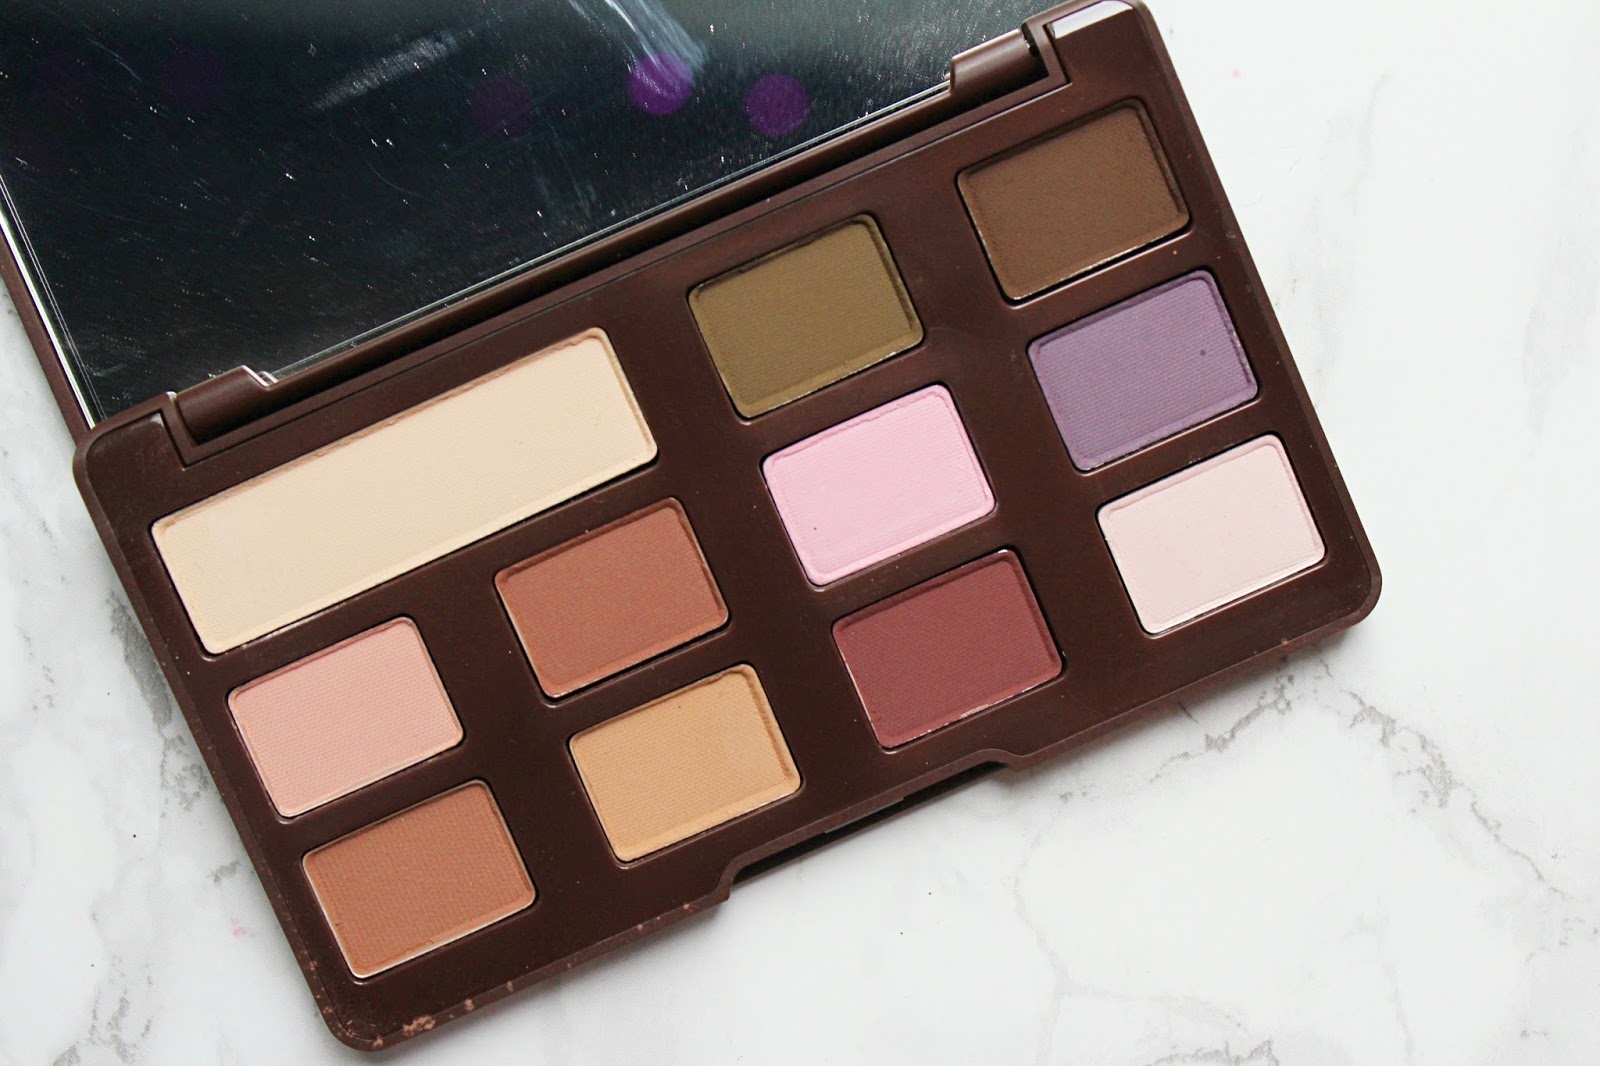 Too Faced Matte Chocolate Chip Palette Review with Swatches 